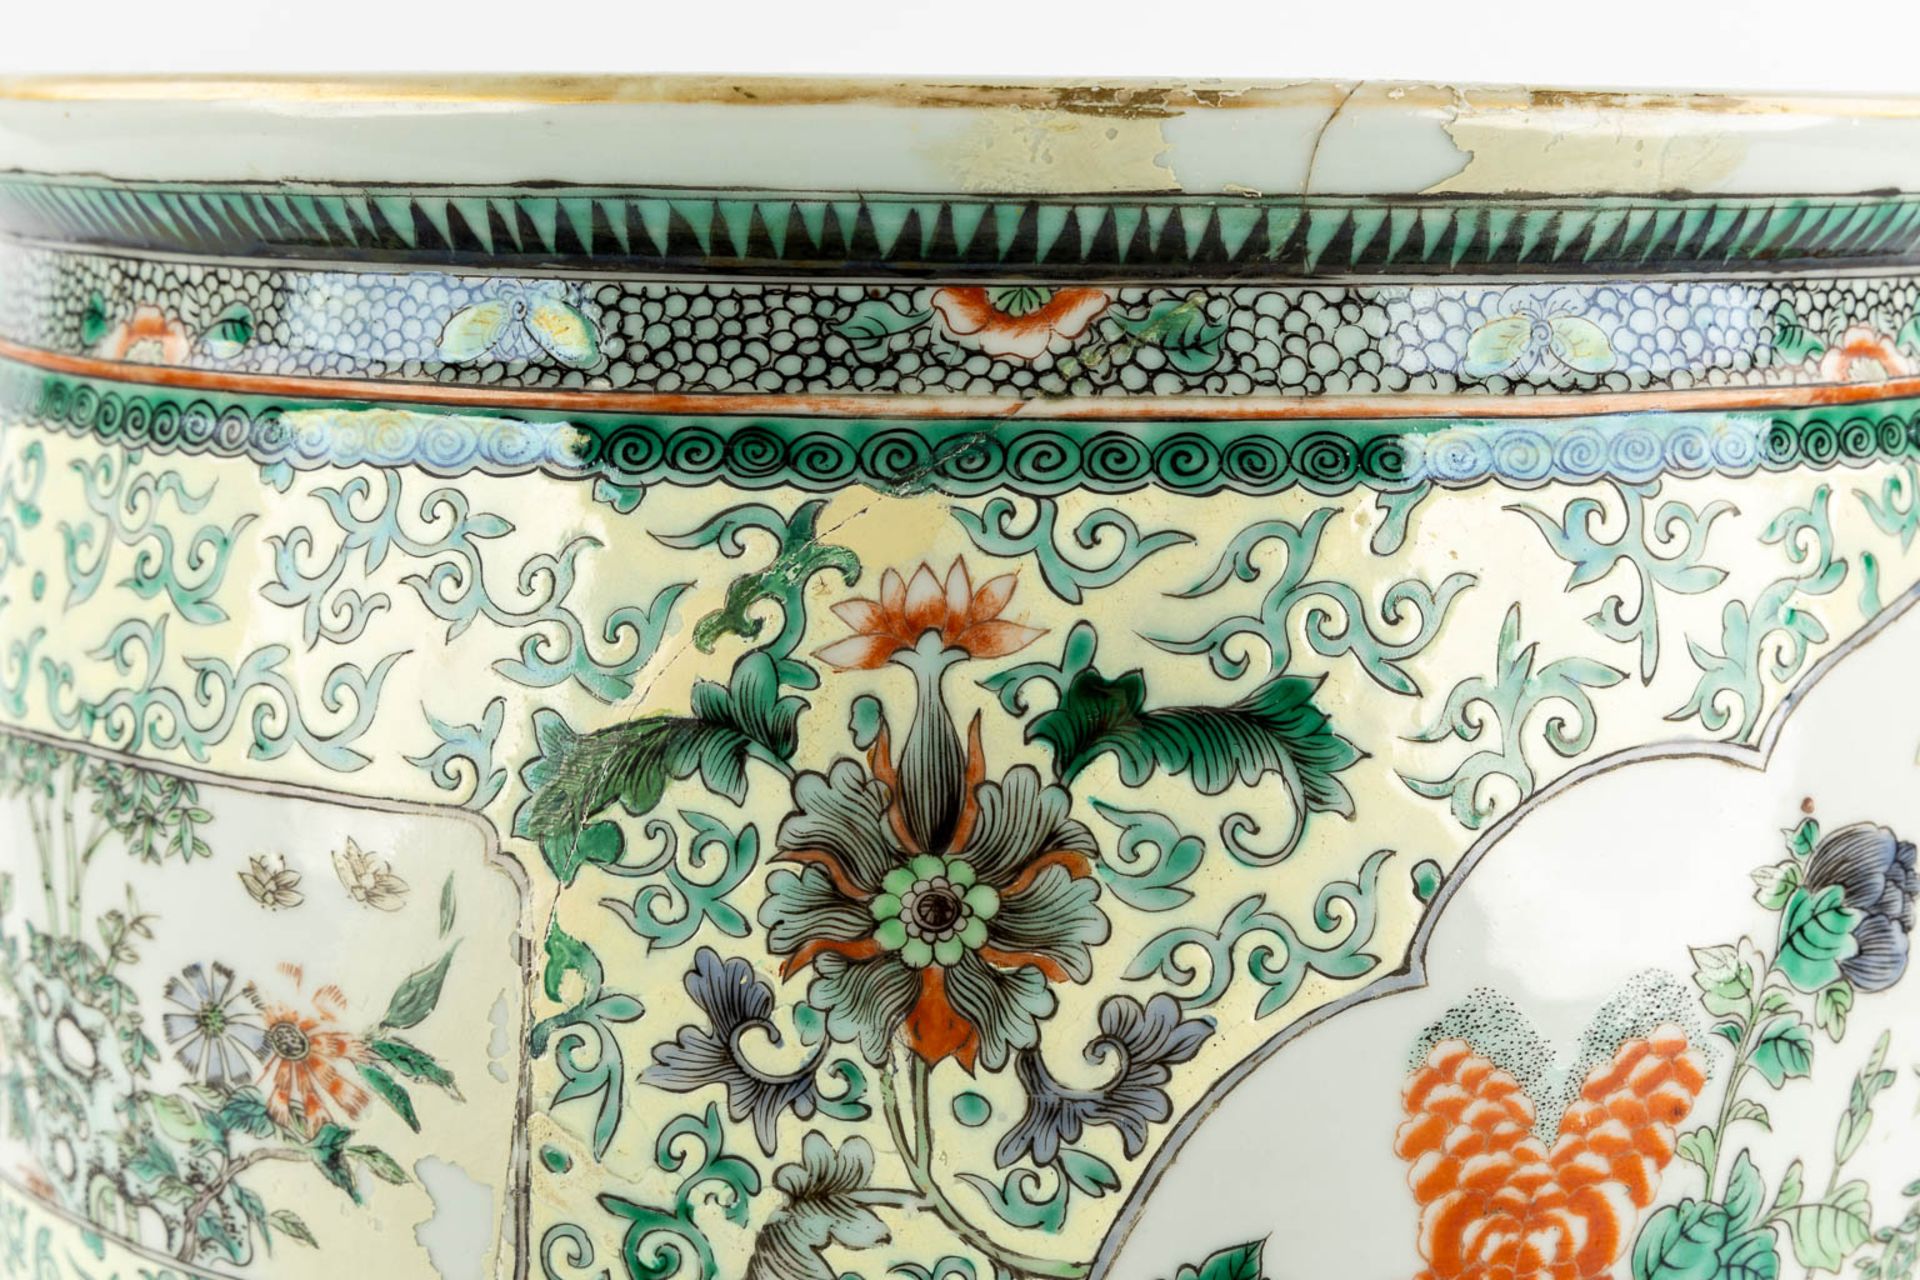 A Large Chinese Cache-Pot, Famille Verte decorated with fauna and flora. 19th C. (H:35 x D:40 cm) - Image 9 of 14